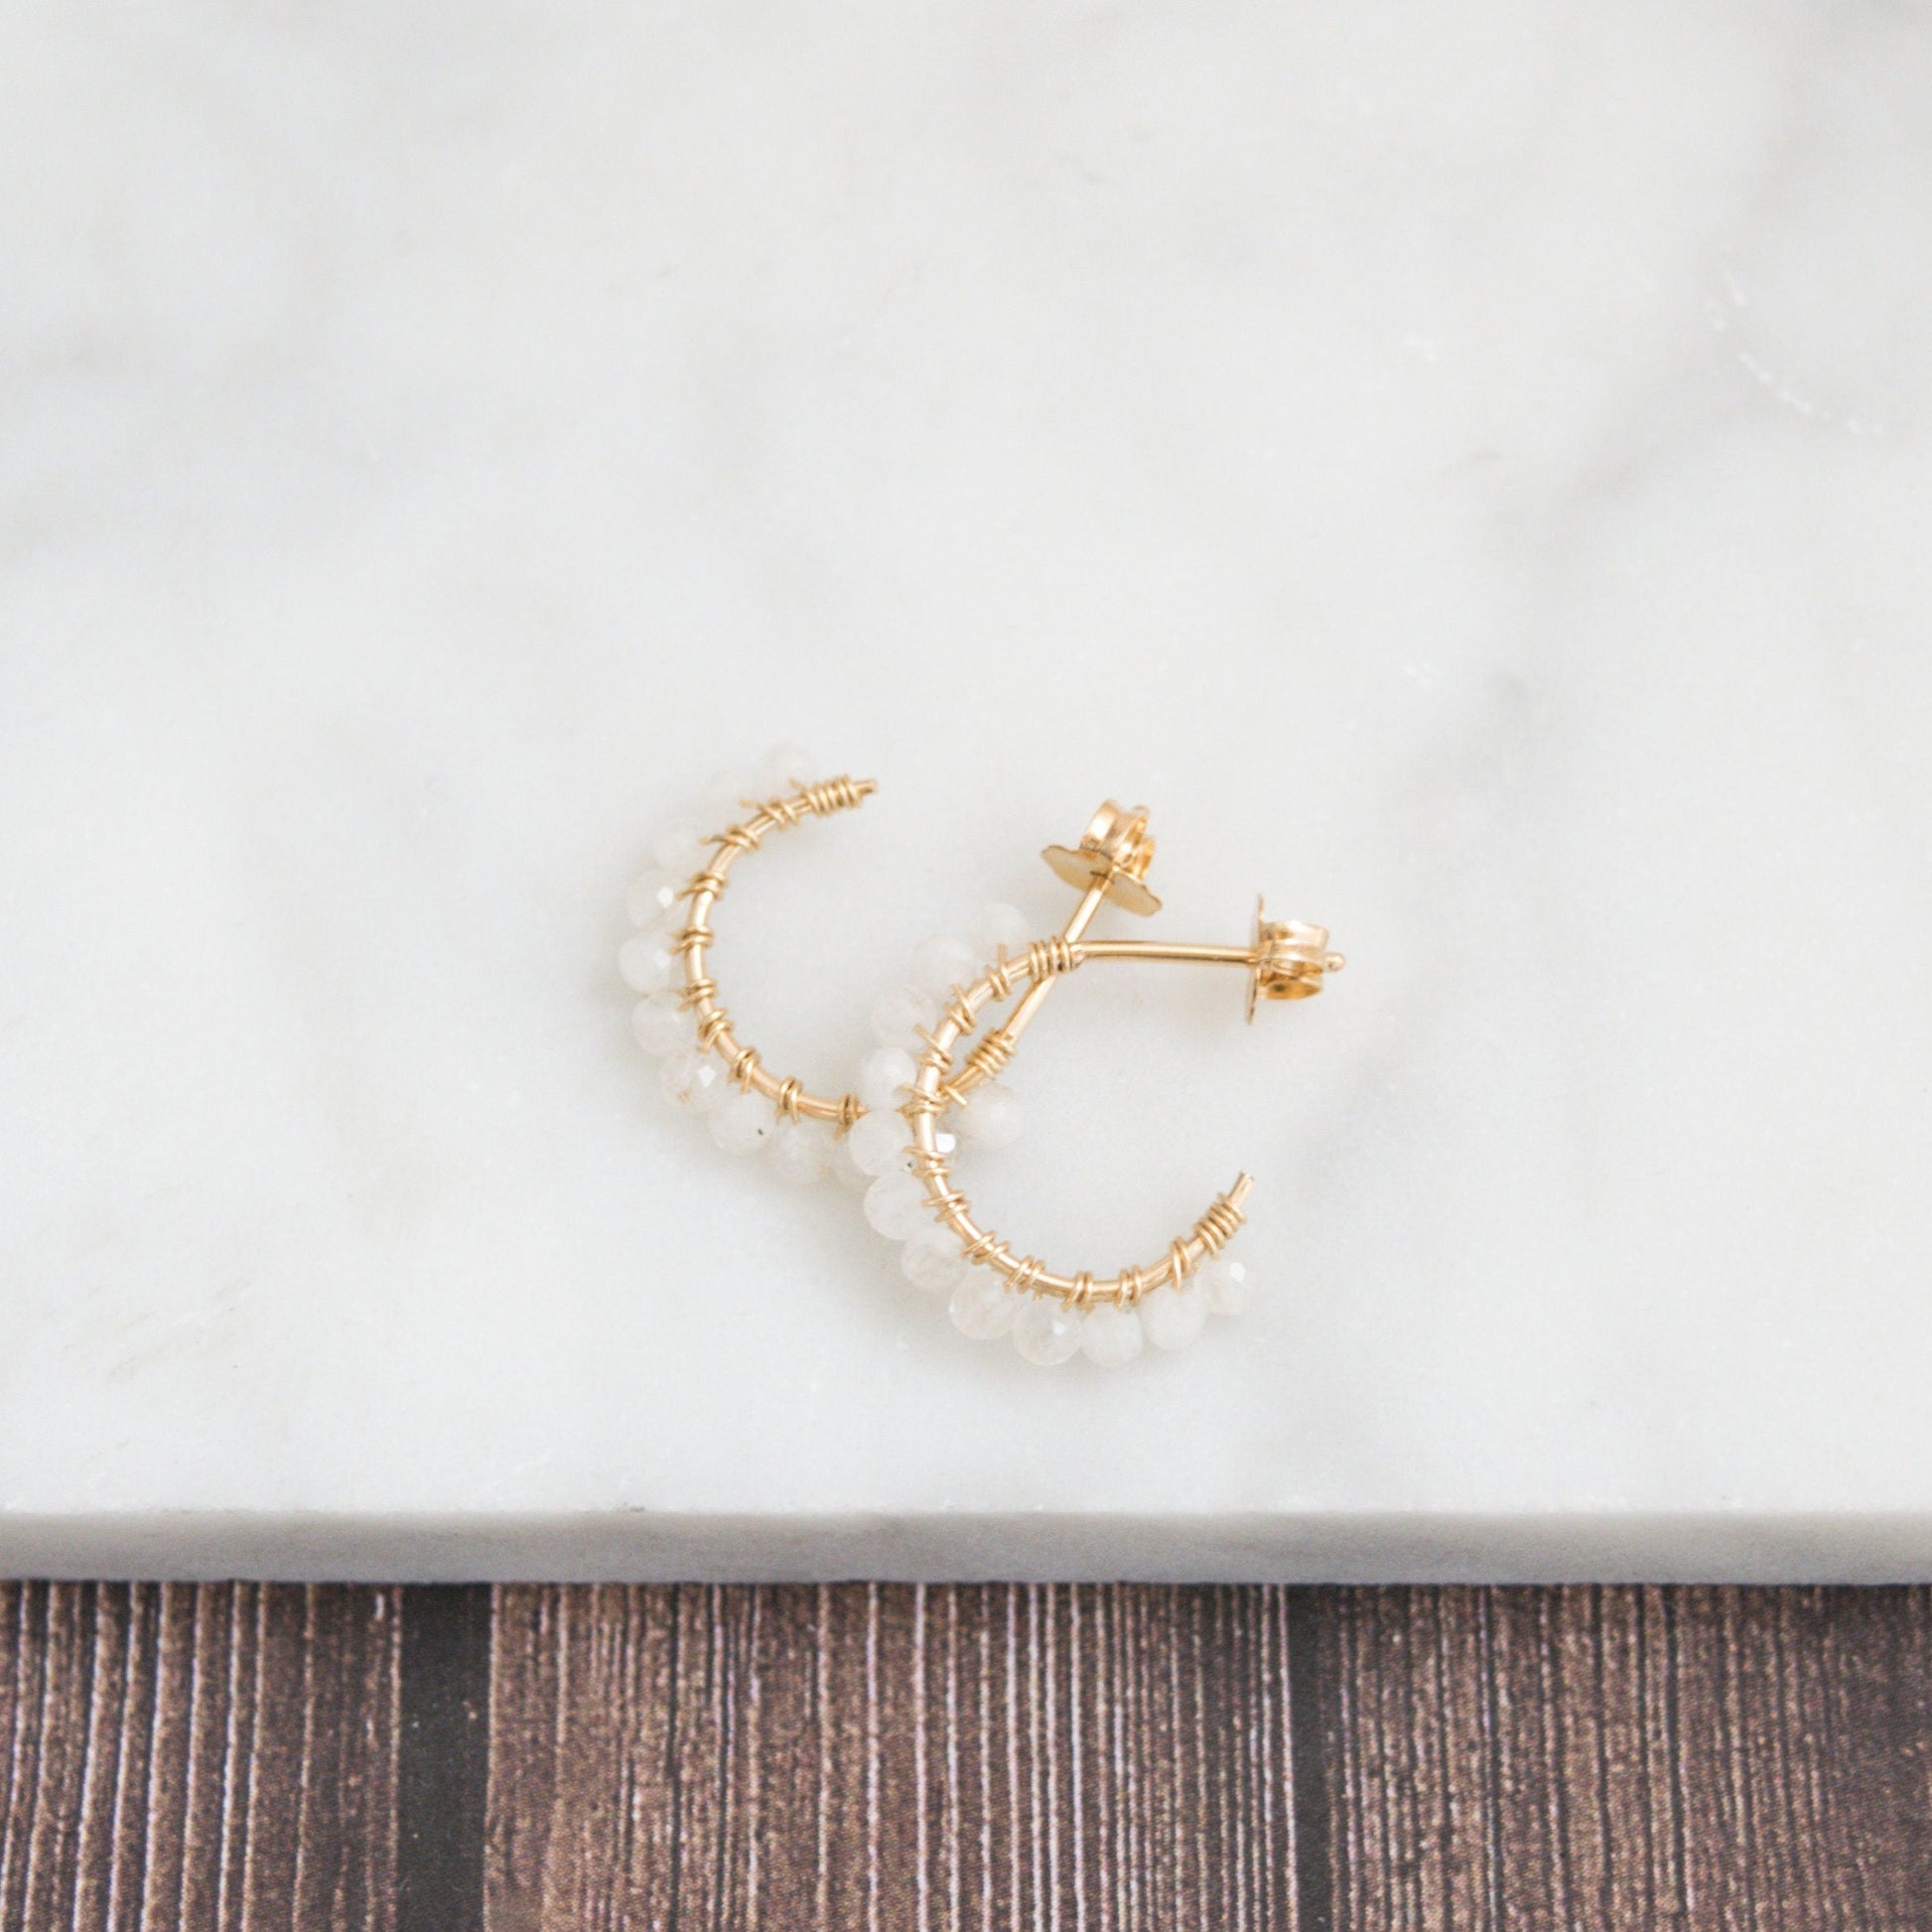 Hand-formed 14k gold-filled wire gracefully shaped into mini rounded hoops. Delicately strung with micro-faceted natural rainbow moonstone beads, these mini hoops add a polished finish to any outfit.